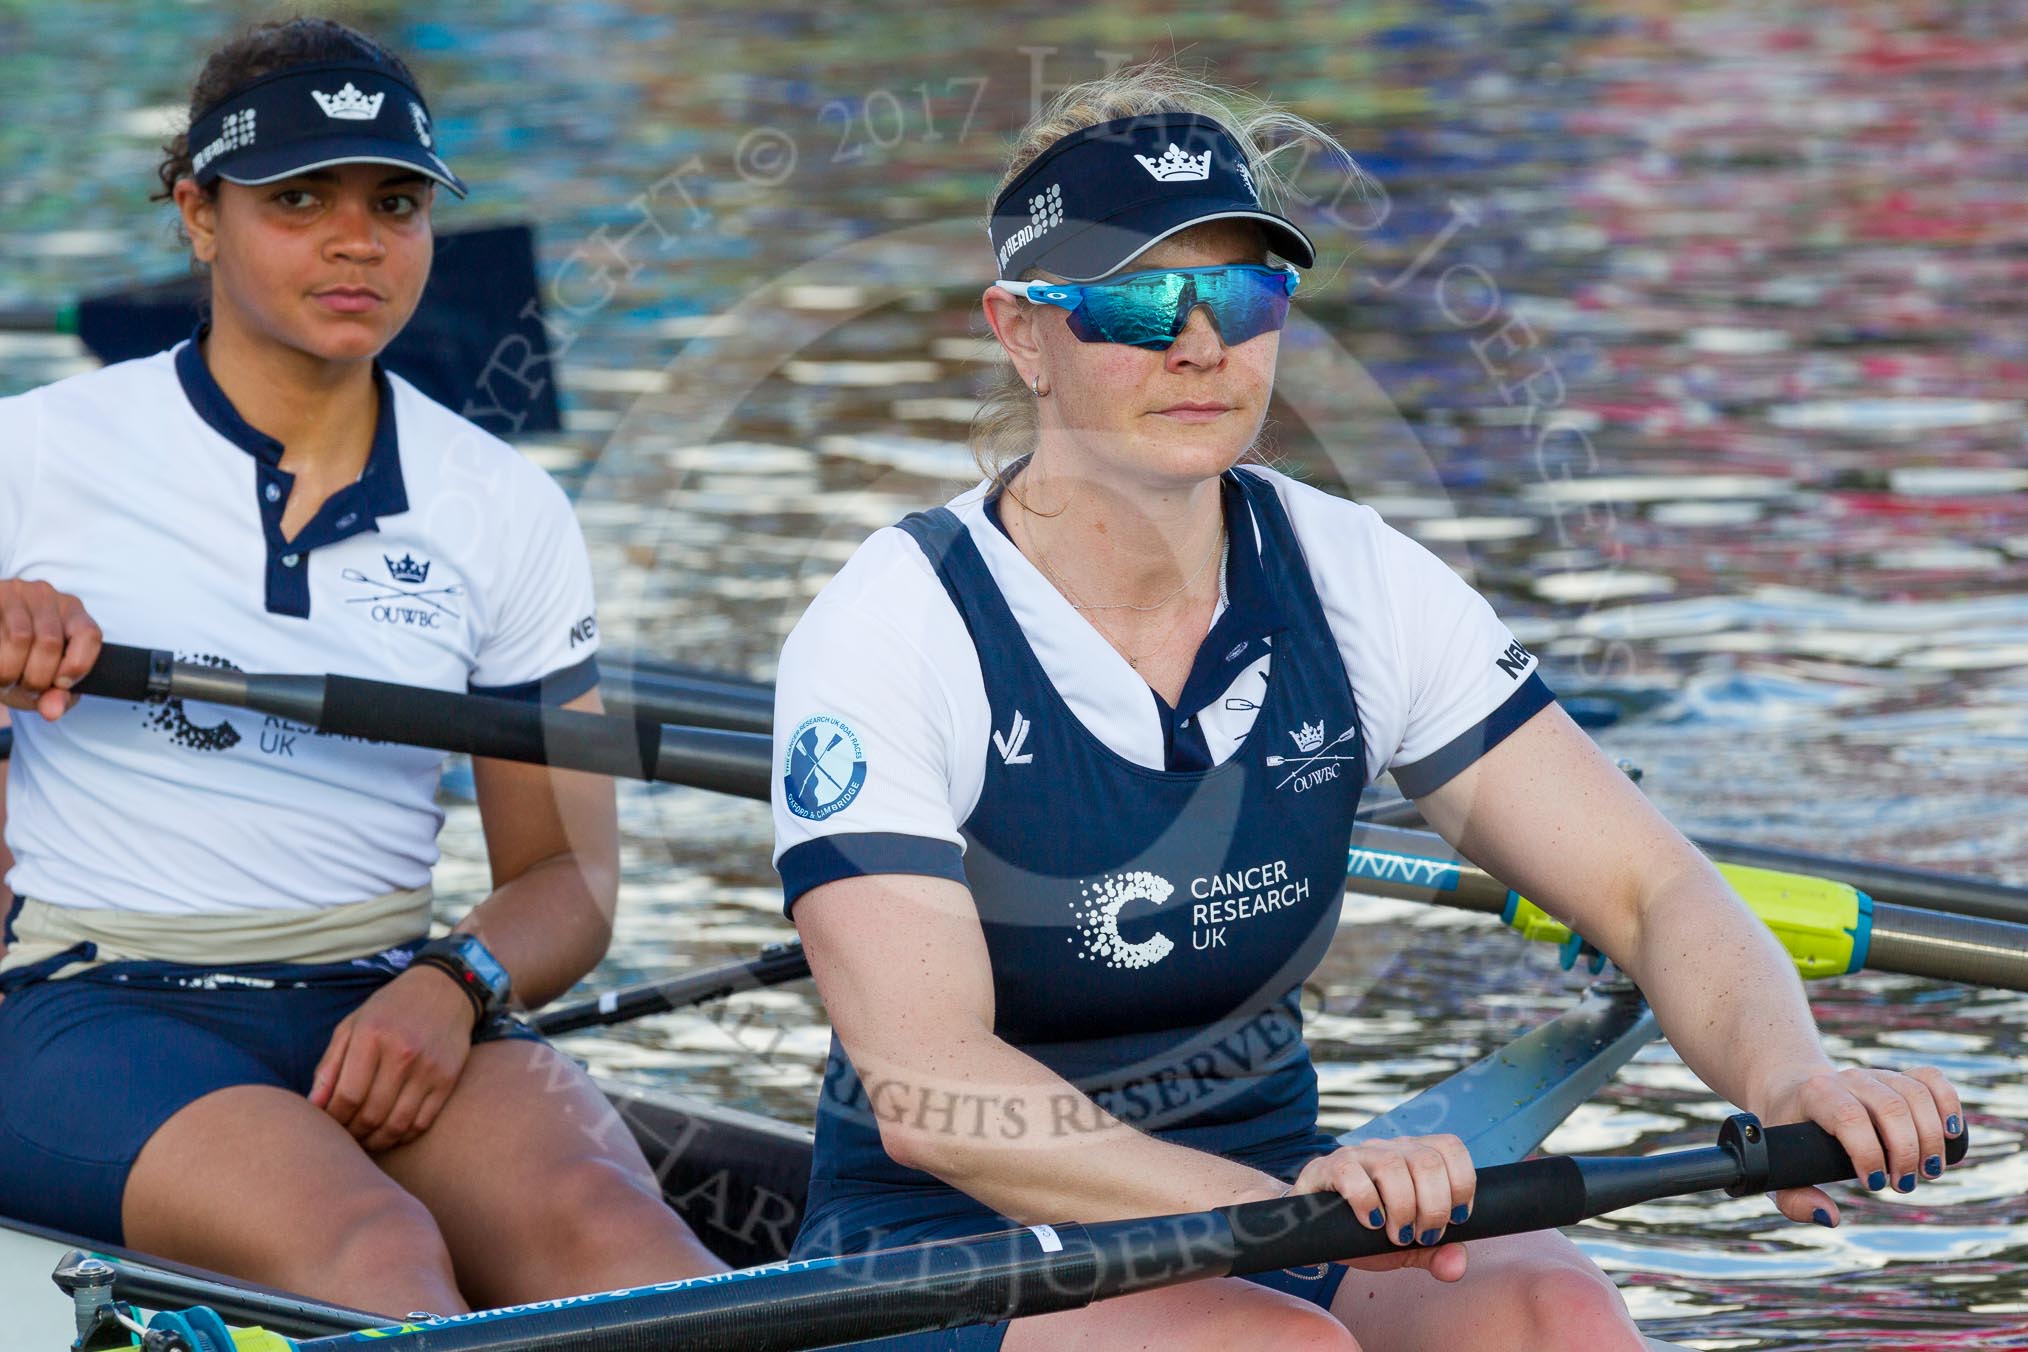 The Boat Race season 2017 -  The Cancer Research Women's Boat Race: OUWBC at the finish line, here 7 seat Jenna Hebert and 6 seat Harriet Austin.
River Thames between Putney Bridge and Mortlake,
London SW15,

United Kingdom,
on 02 April 2017 at 16:59, image #206